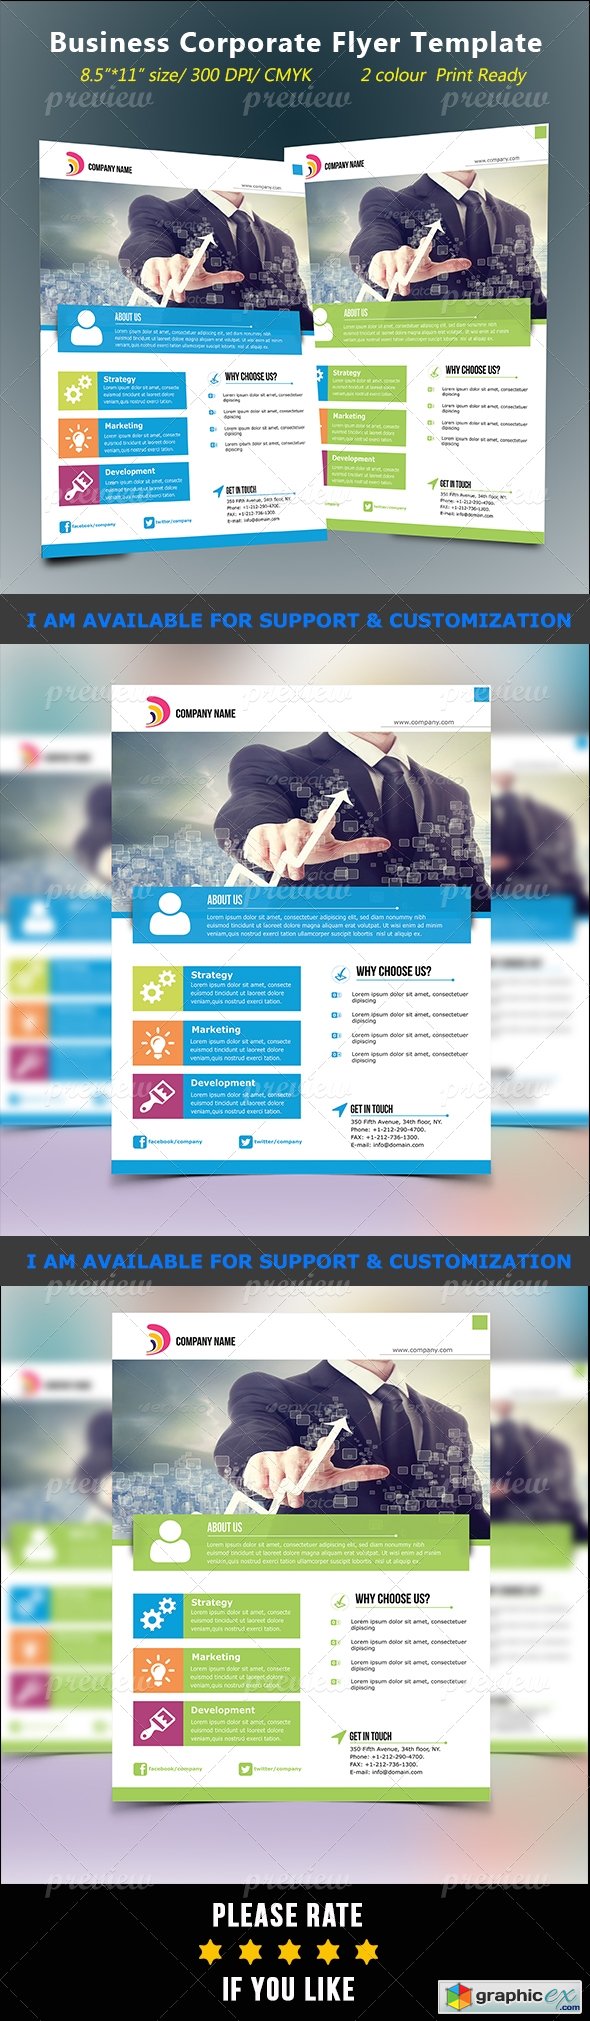 Corporate Business Flyer 4843